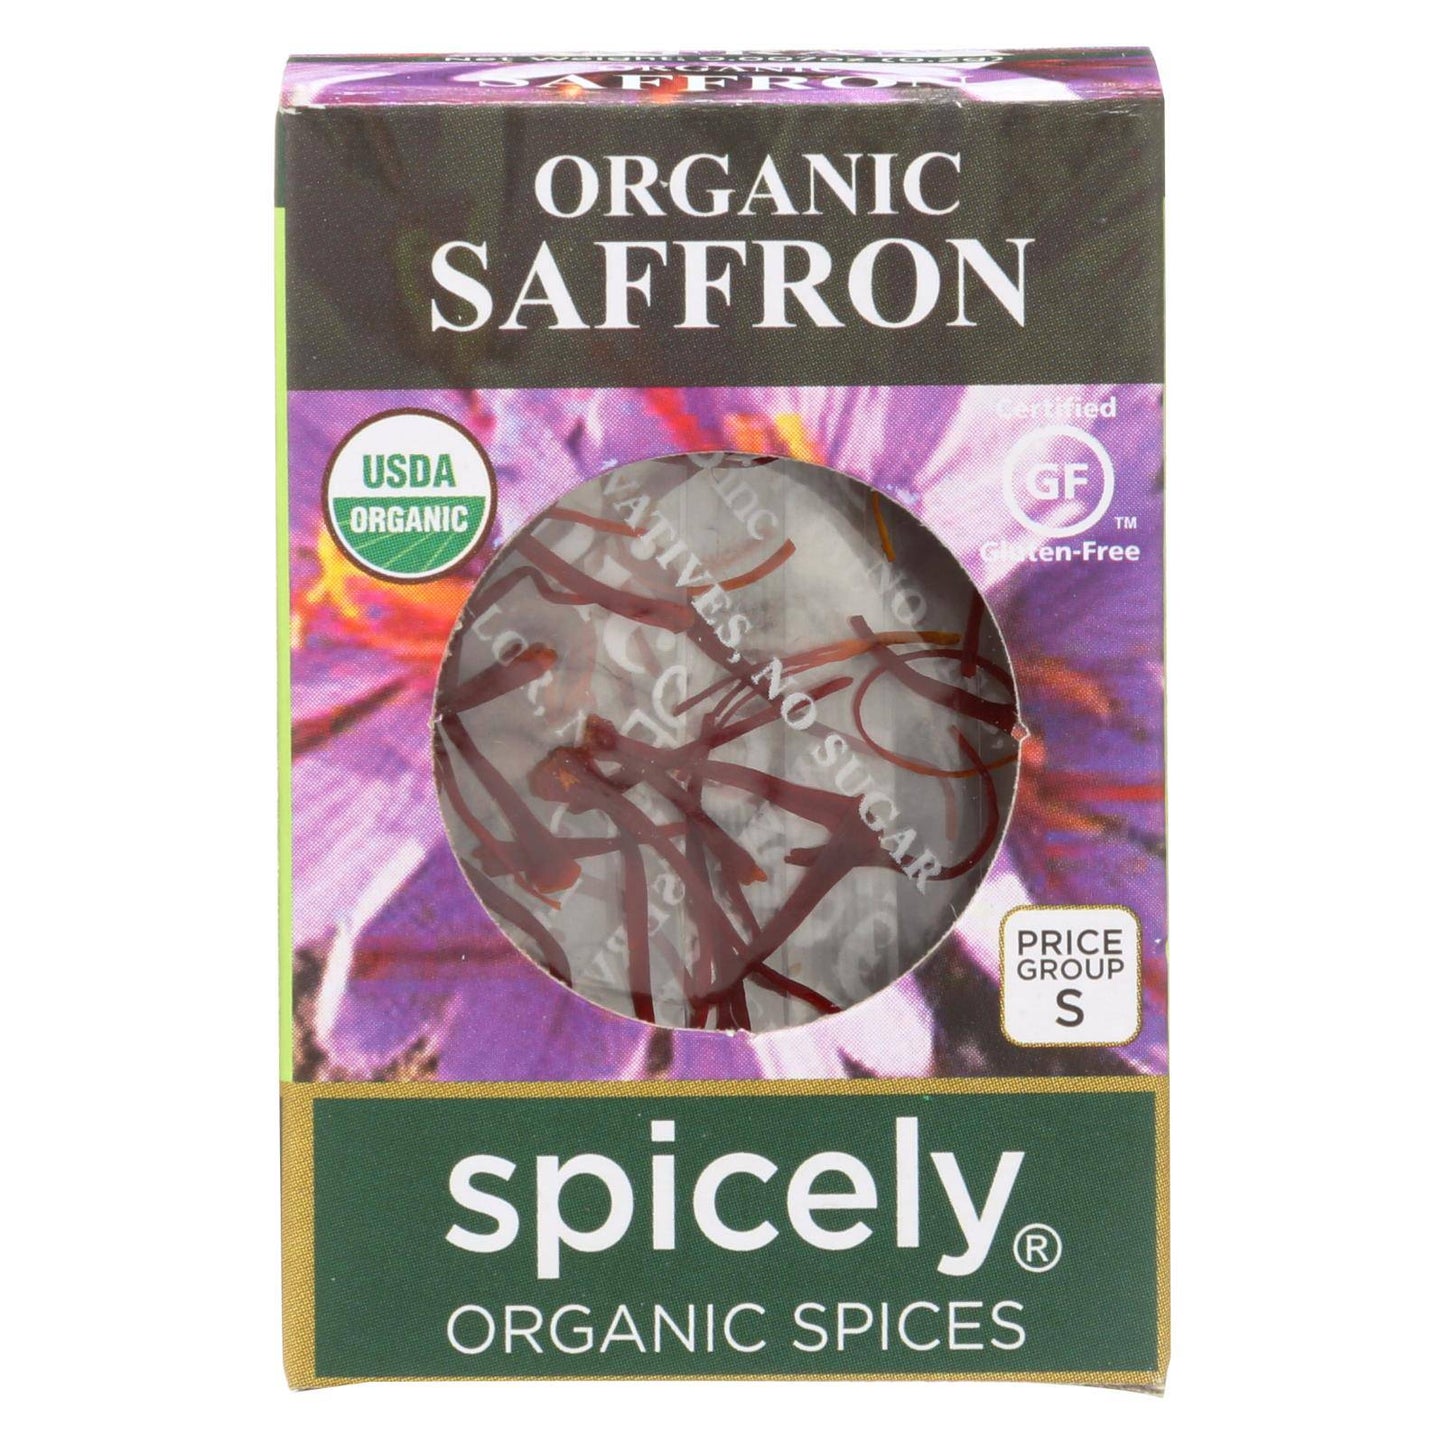 Buy Spicely Organics - Organic Saffron - Case Of 6 - 0.007 Oz.  at OnlyNaturals.us